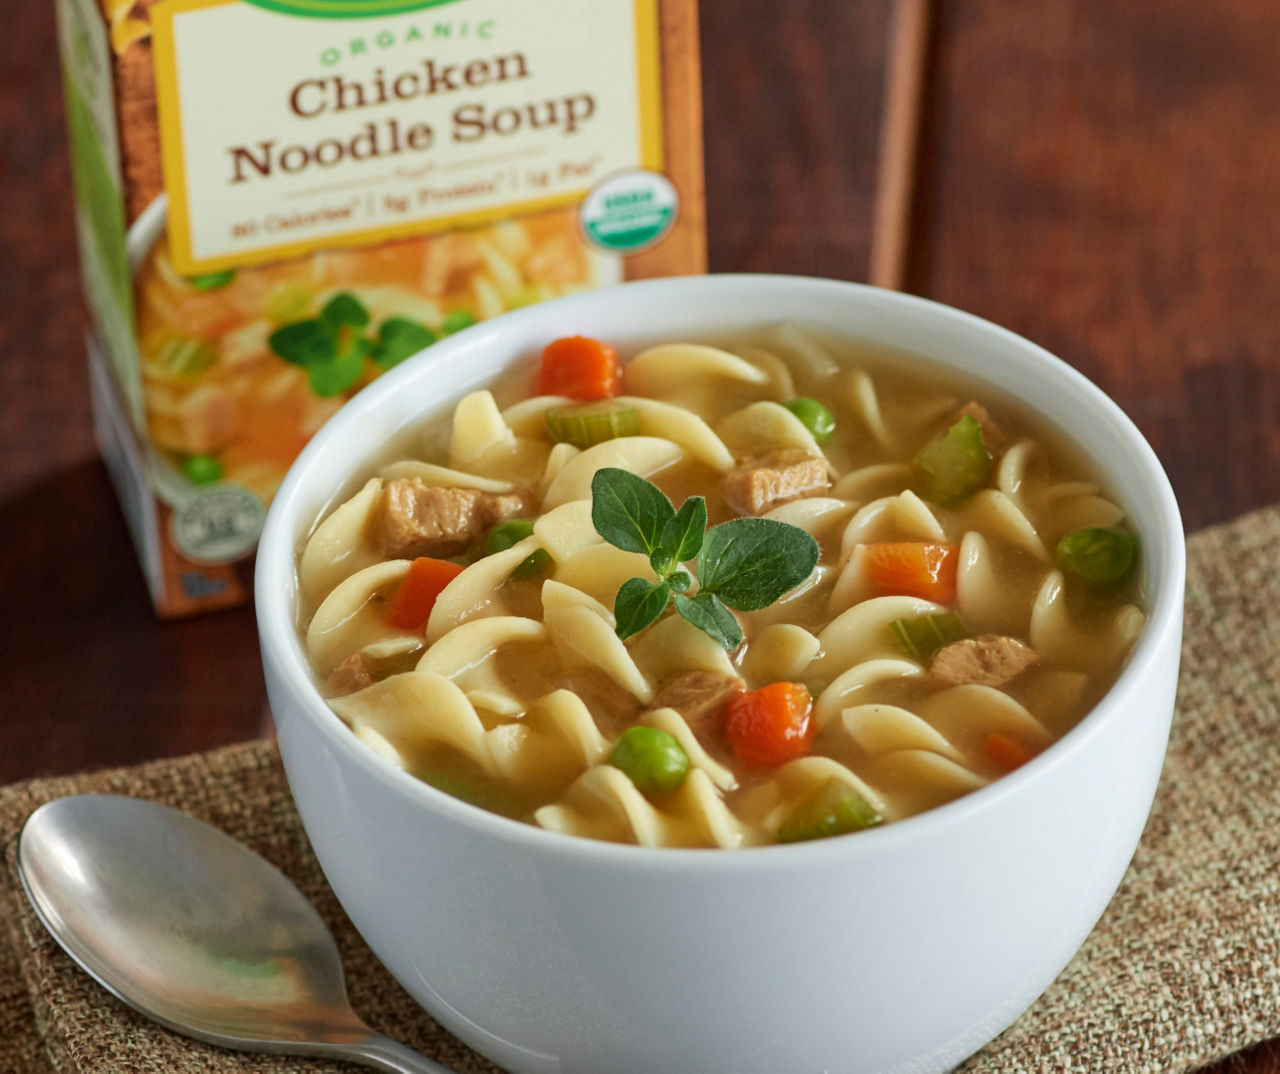 Campbell's Organic Chicken Noodle Soup, 17 oz - Foods Co.